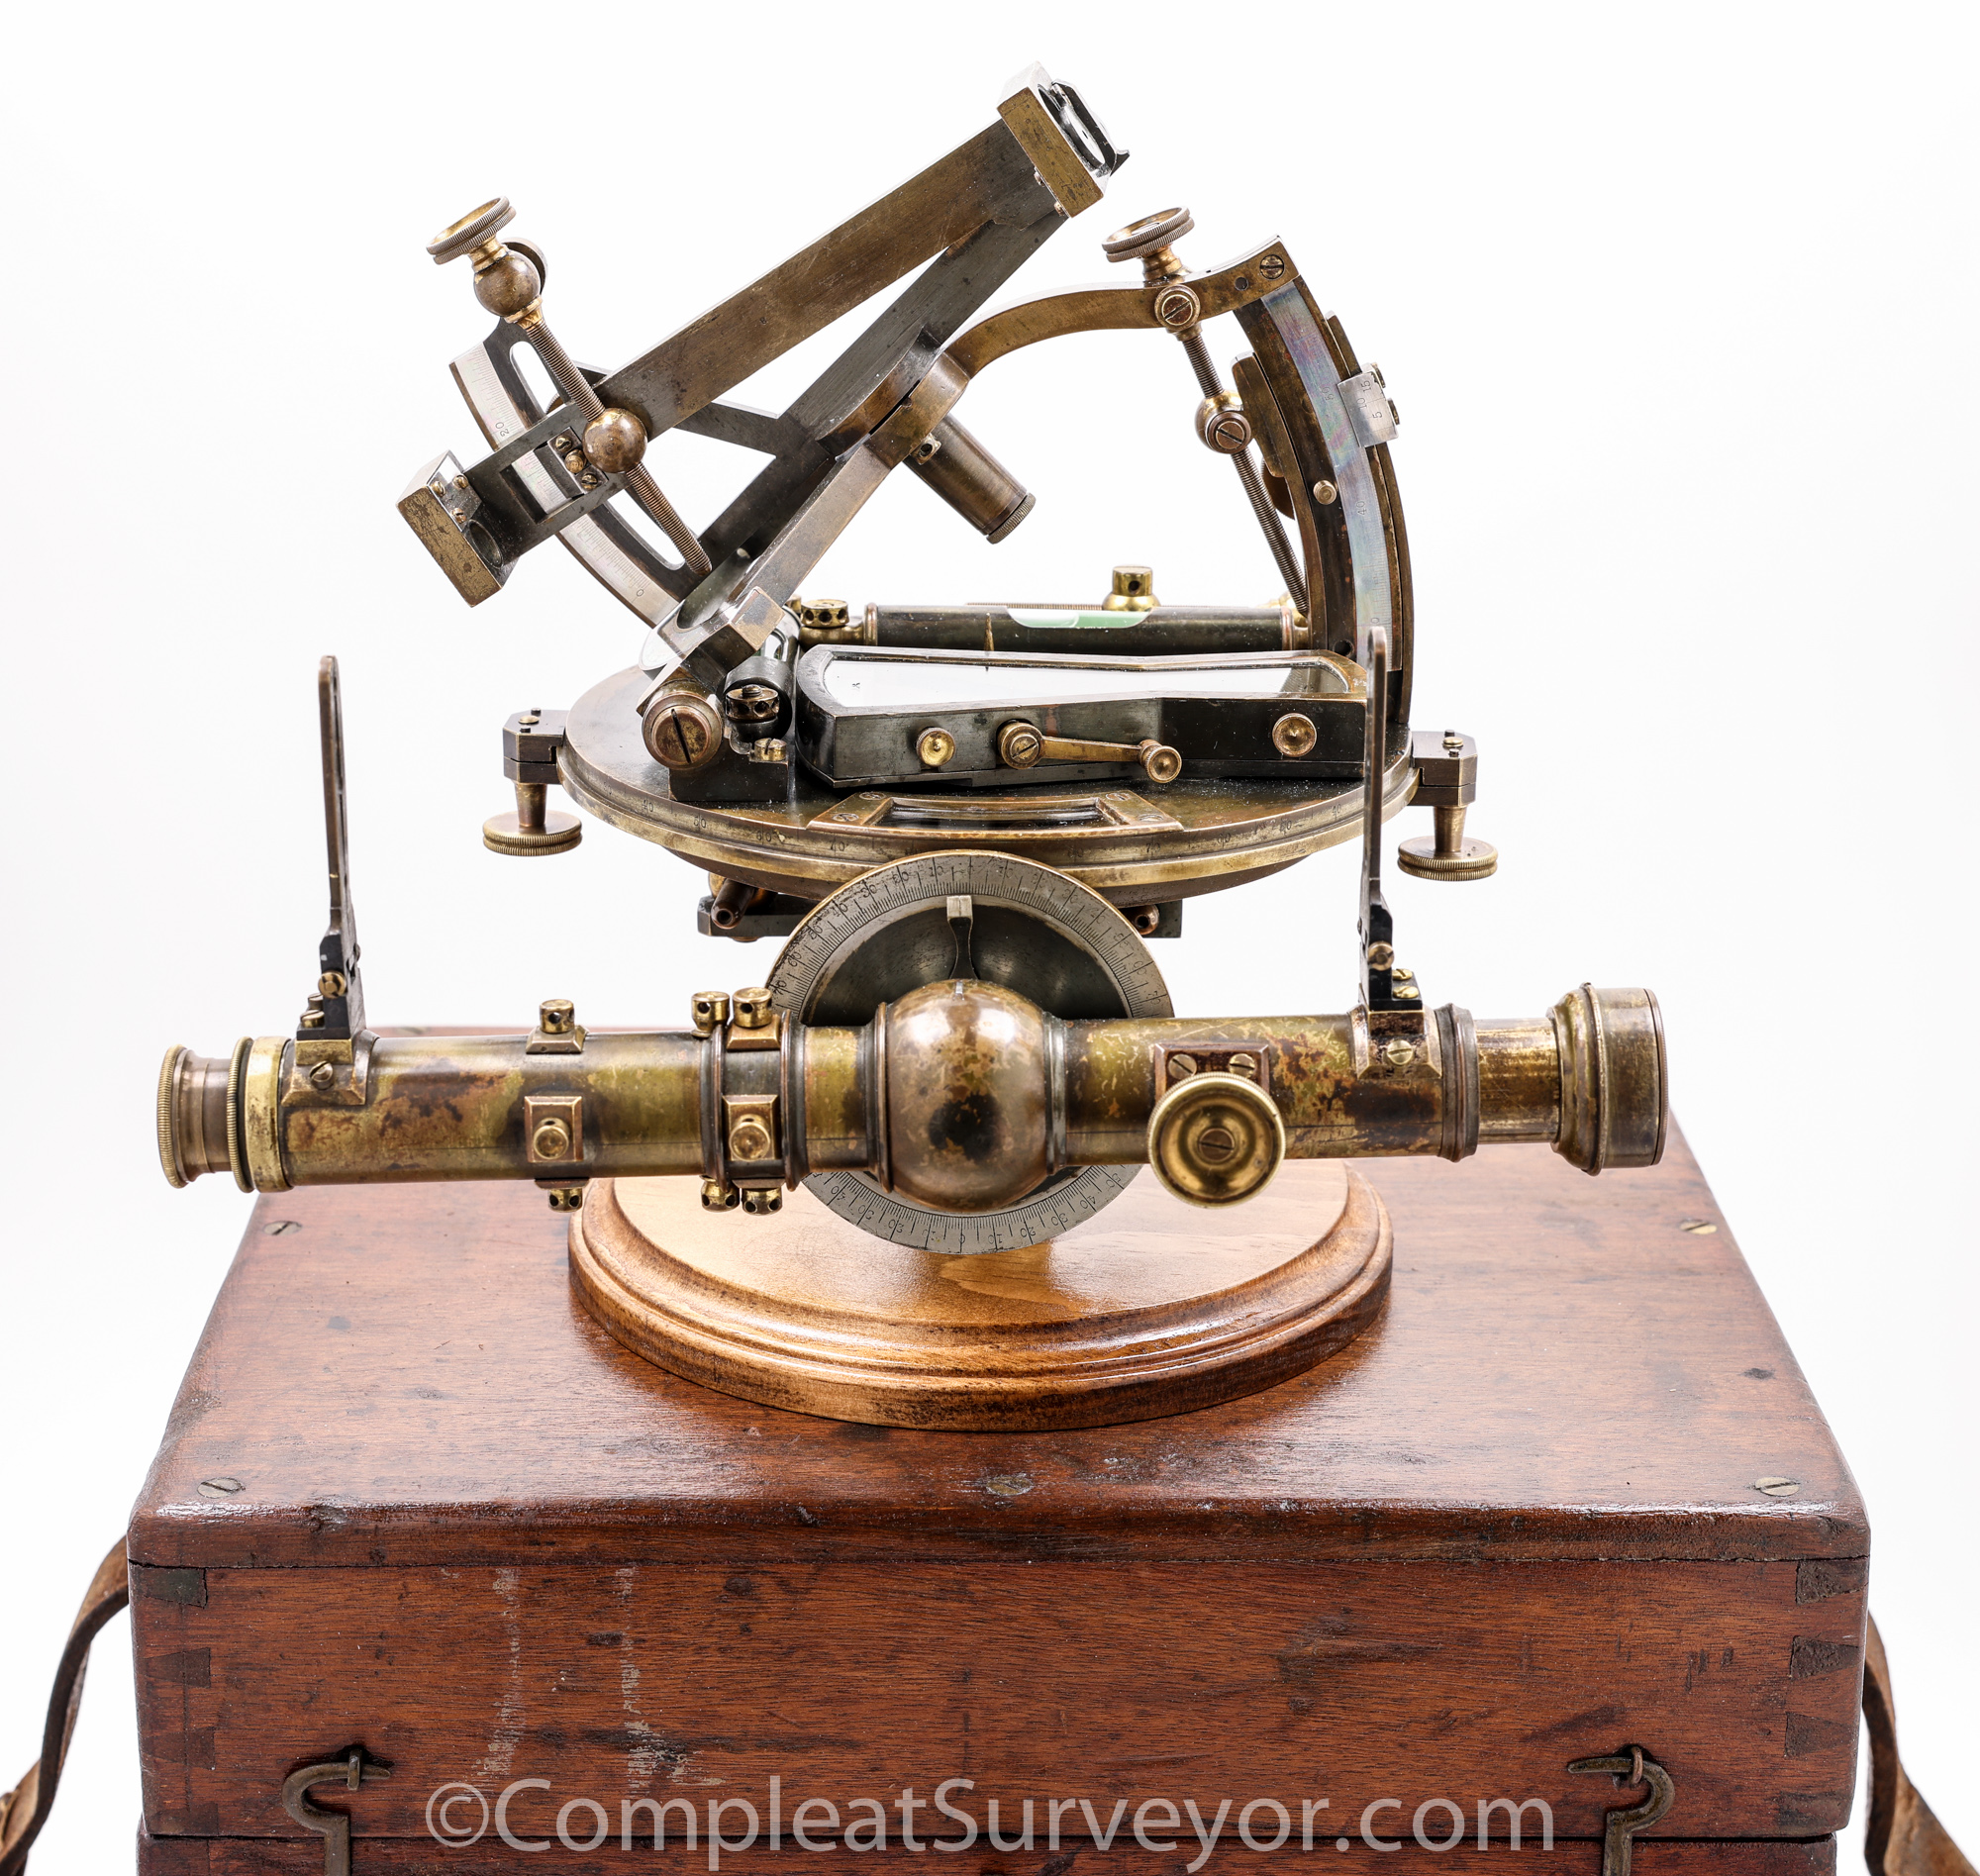 Black Friday Sale – Gurley Solar Telescope Compass – One of Two Known